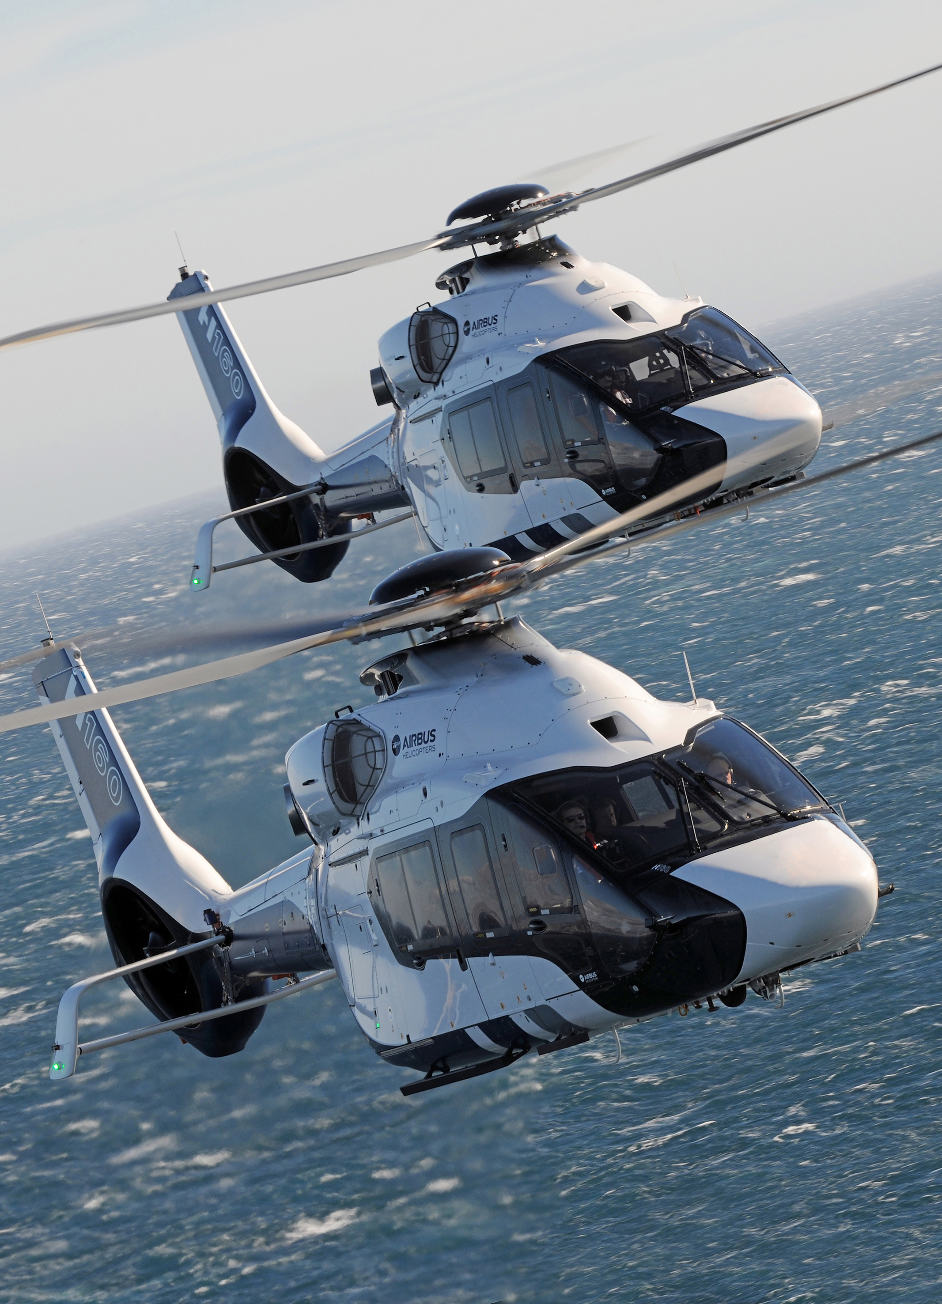 H160 receives FAA certification